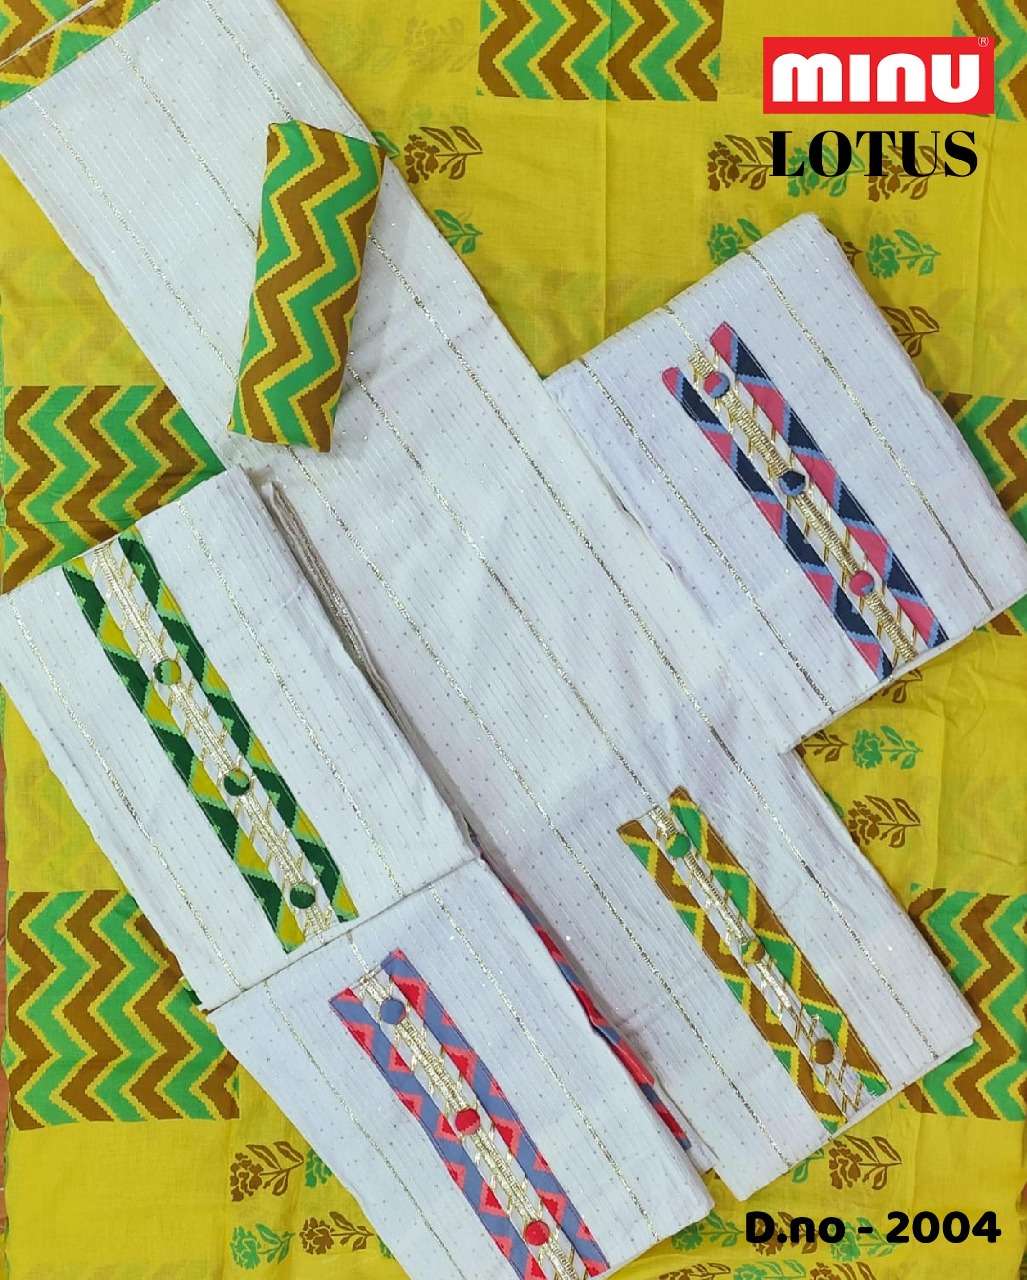 Minu LOTUS Exclusive Cotton Embroidered Sequence Work Dress Material-20P Catalogue